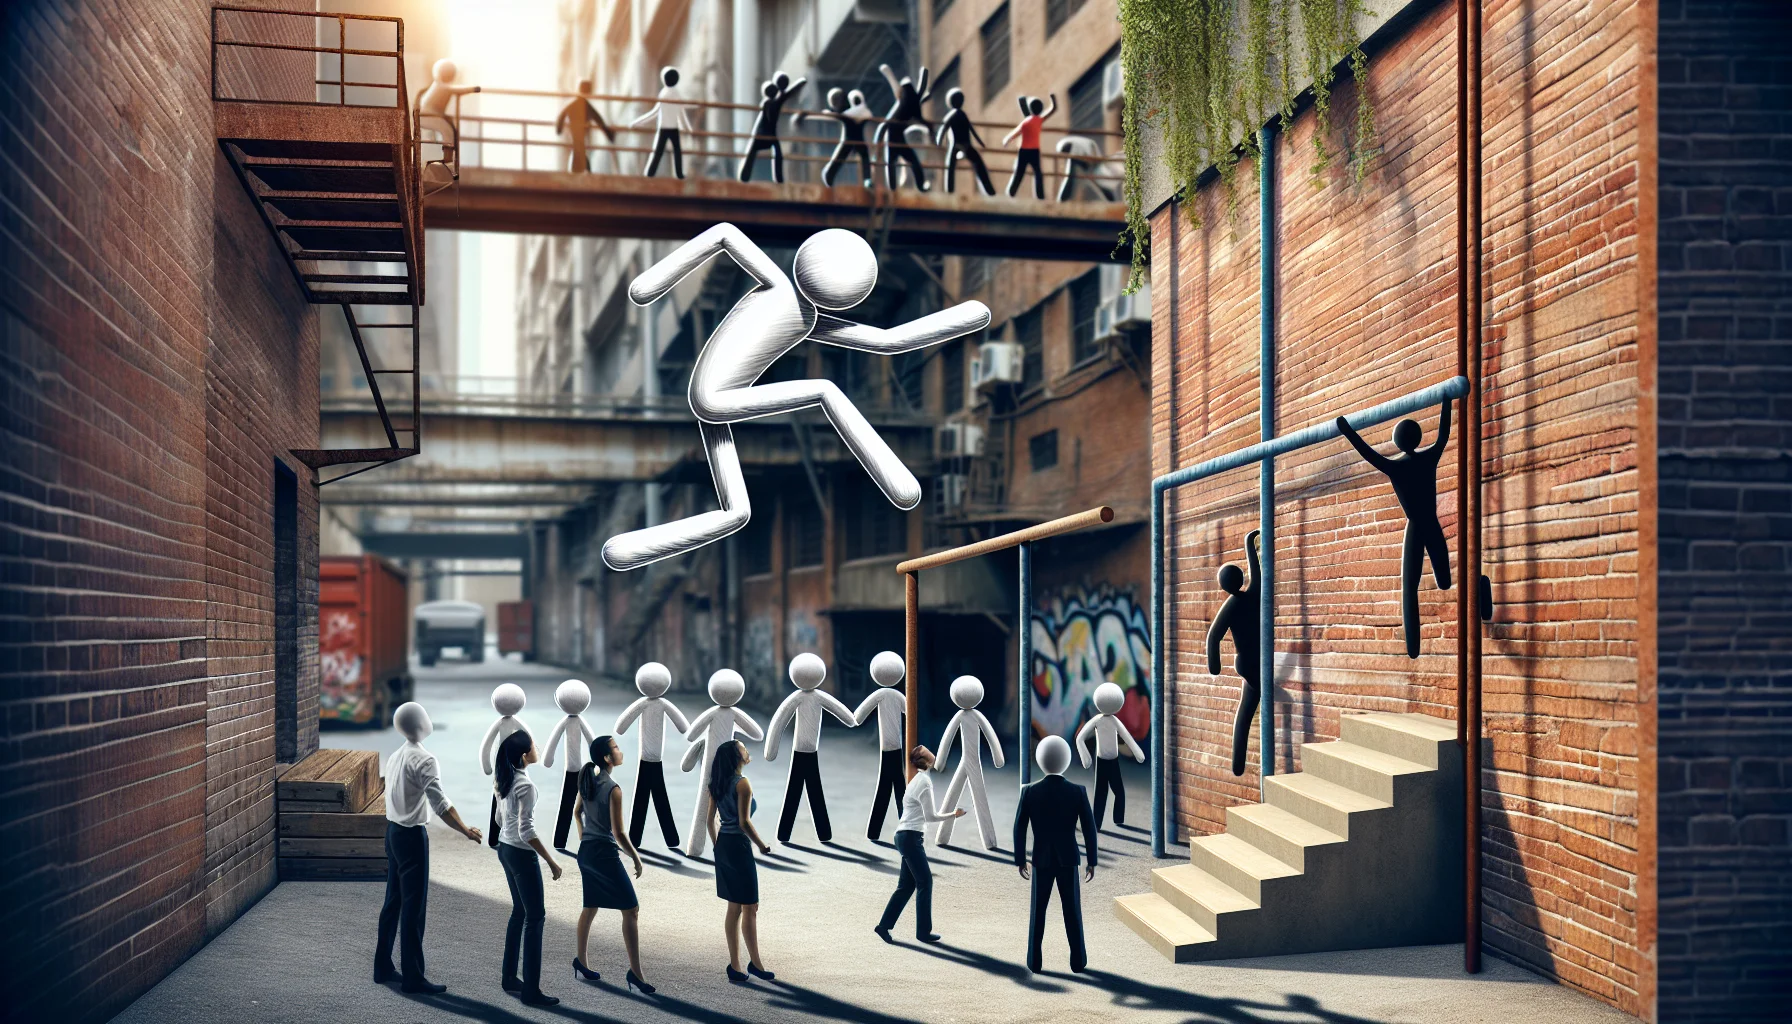 Create an imaginative and humorous scene featuring a stickman figure practicing parkour. The setting is an urban jungle, with brick walls, metal railings, and concrete structures. The stickman uses these as obstacles, leaping over them with agility and grace. Included in the image is a group of people, with diverse ethnic backgrounds and genders, looking on with amazement and laughter, feeling motivated to join in. The scene is both exhilarating and lighthearted, helping viewers appreciate the benefits and fun of physical exercise.